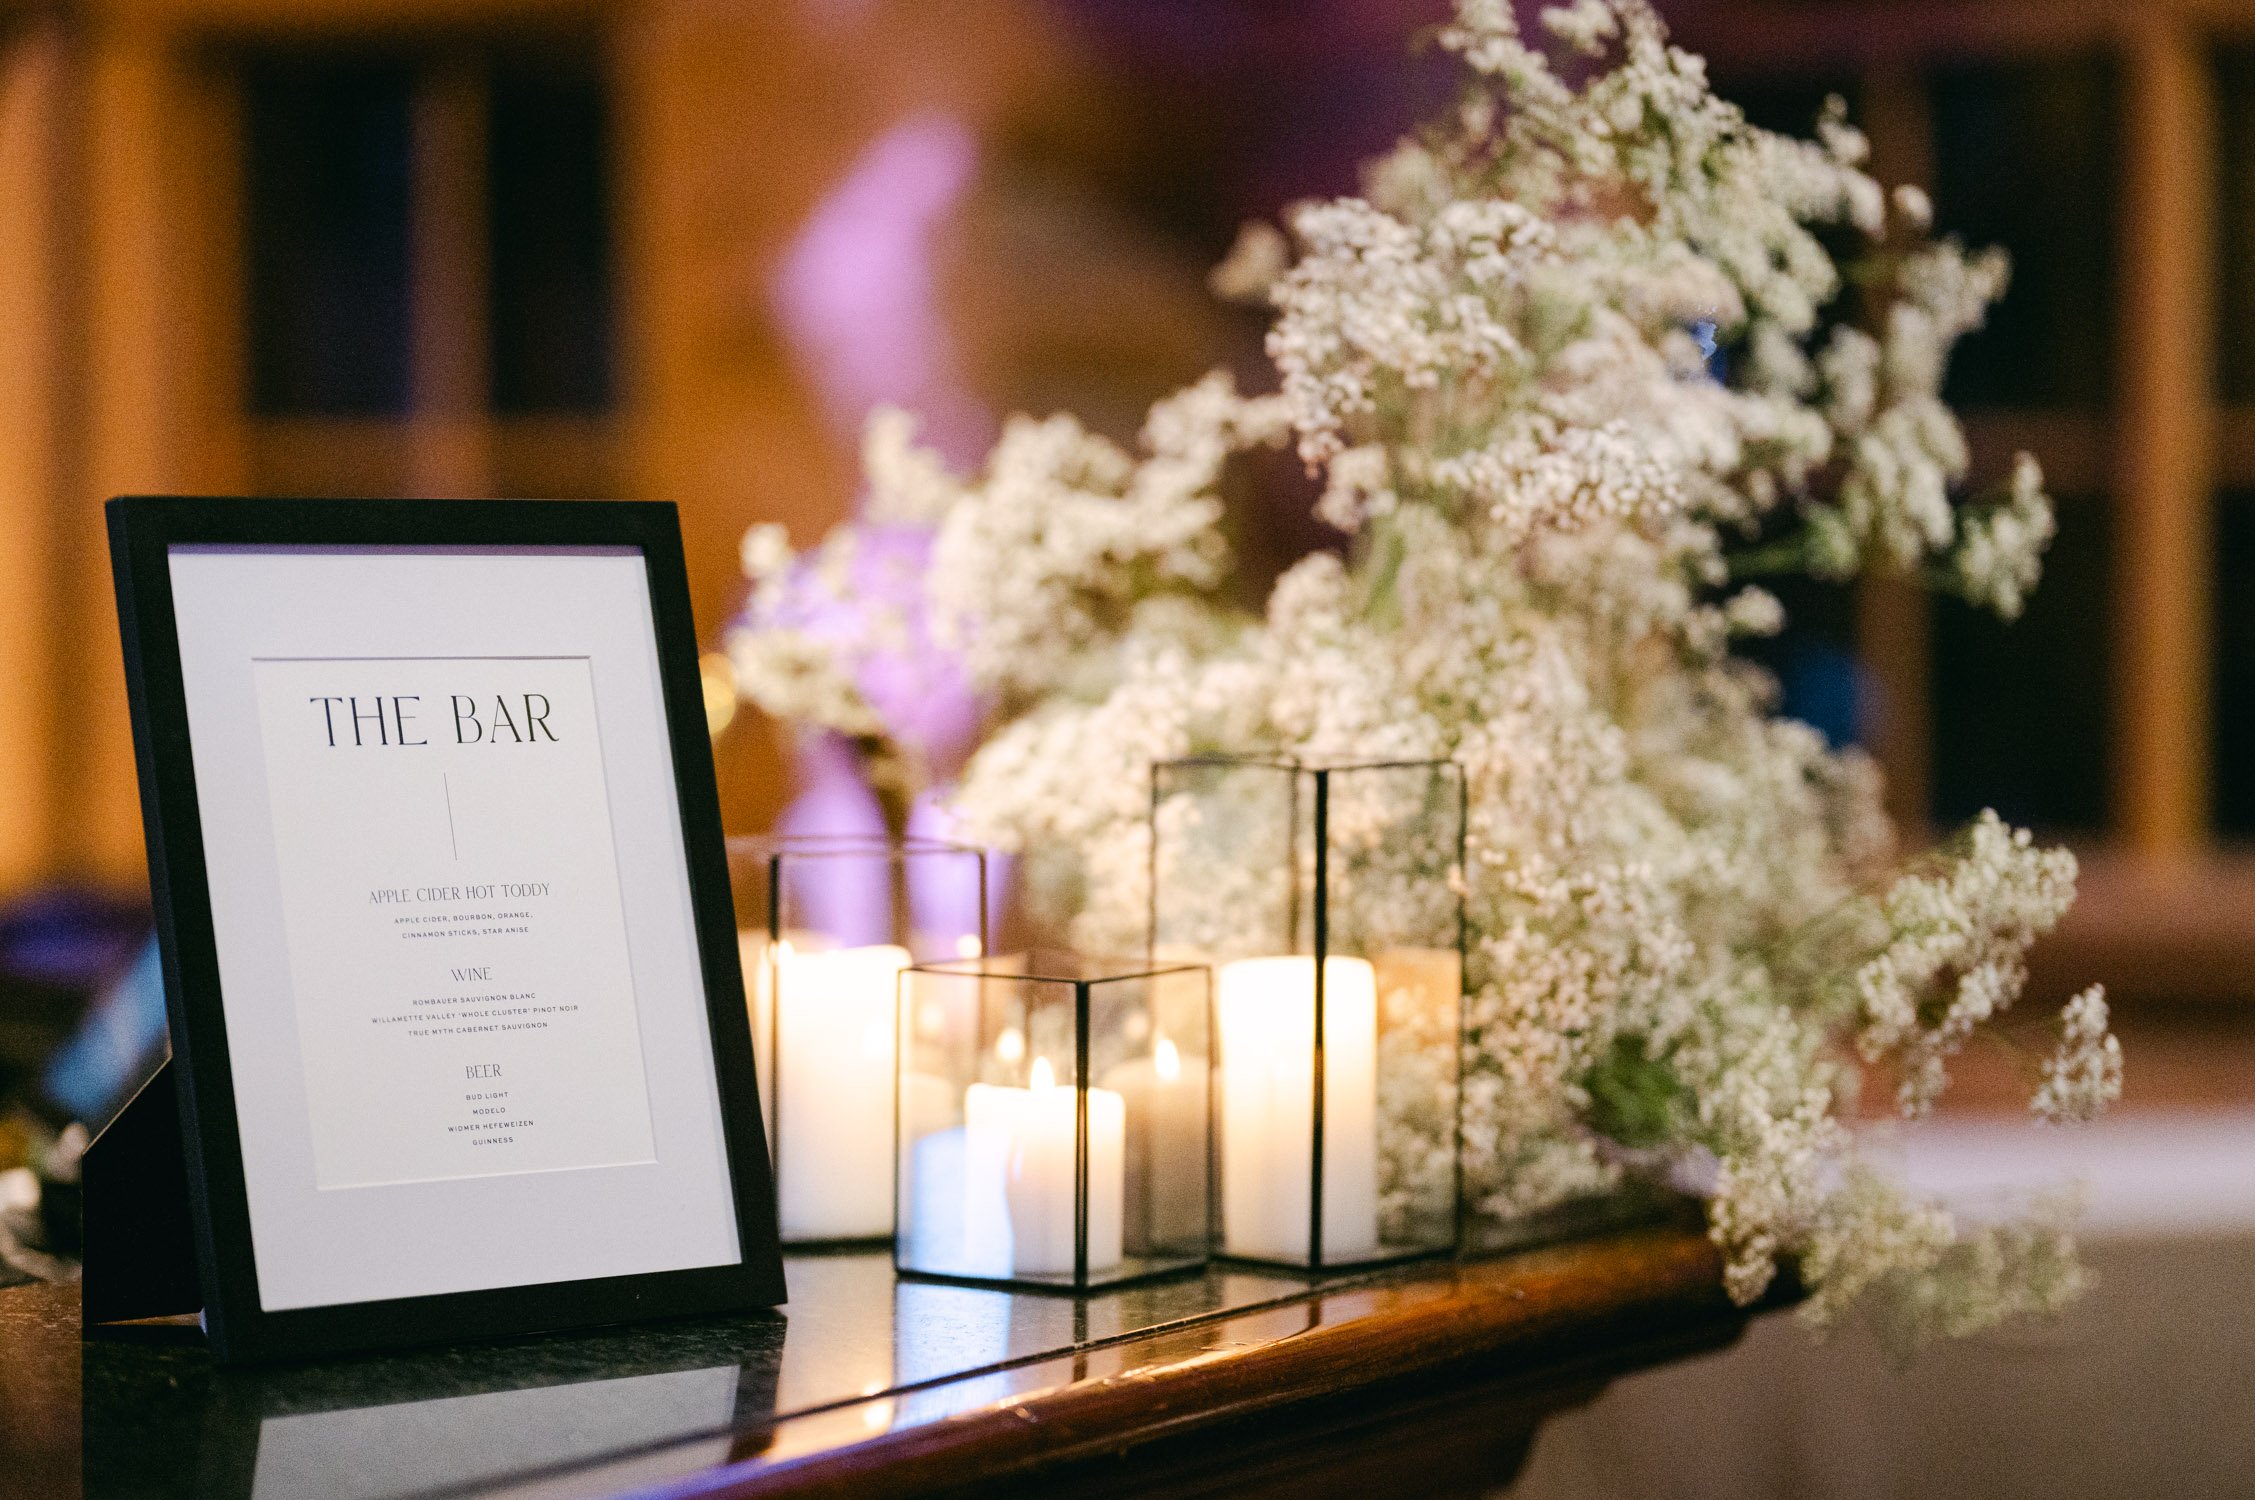 Sun Valley Roundhouse Wedding photo of the bar menu in minimal design, candles, and white flower setup for the reception